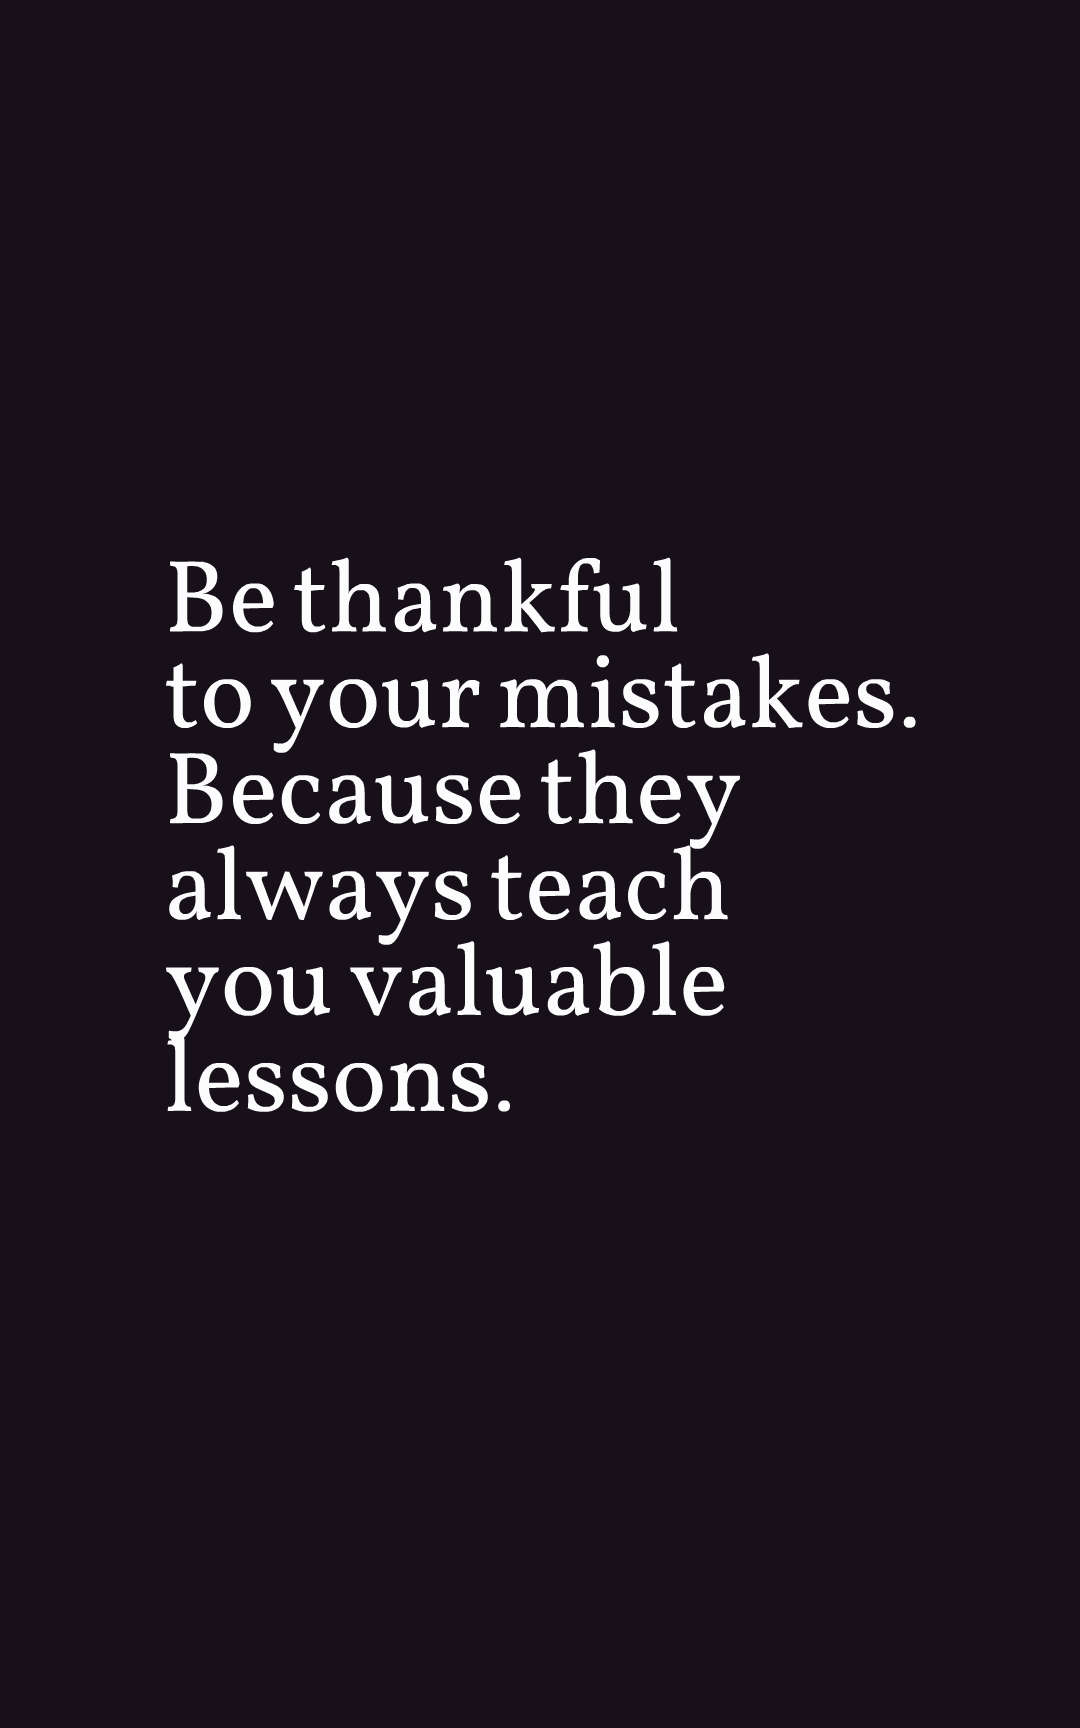 Be thankful to your mistakes. Because they always teach you valuable lessons.